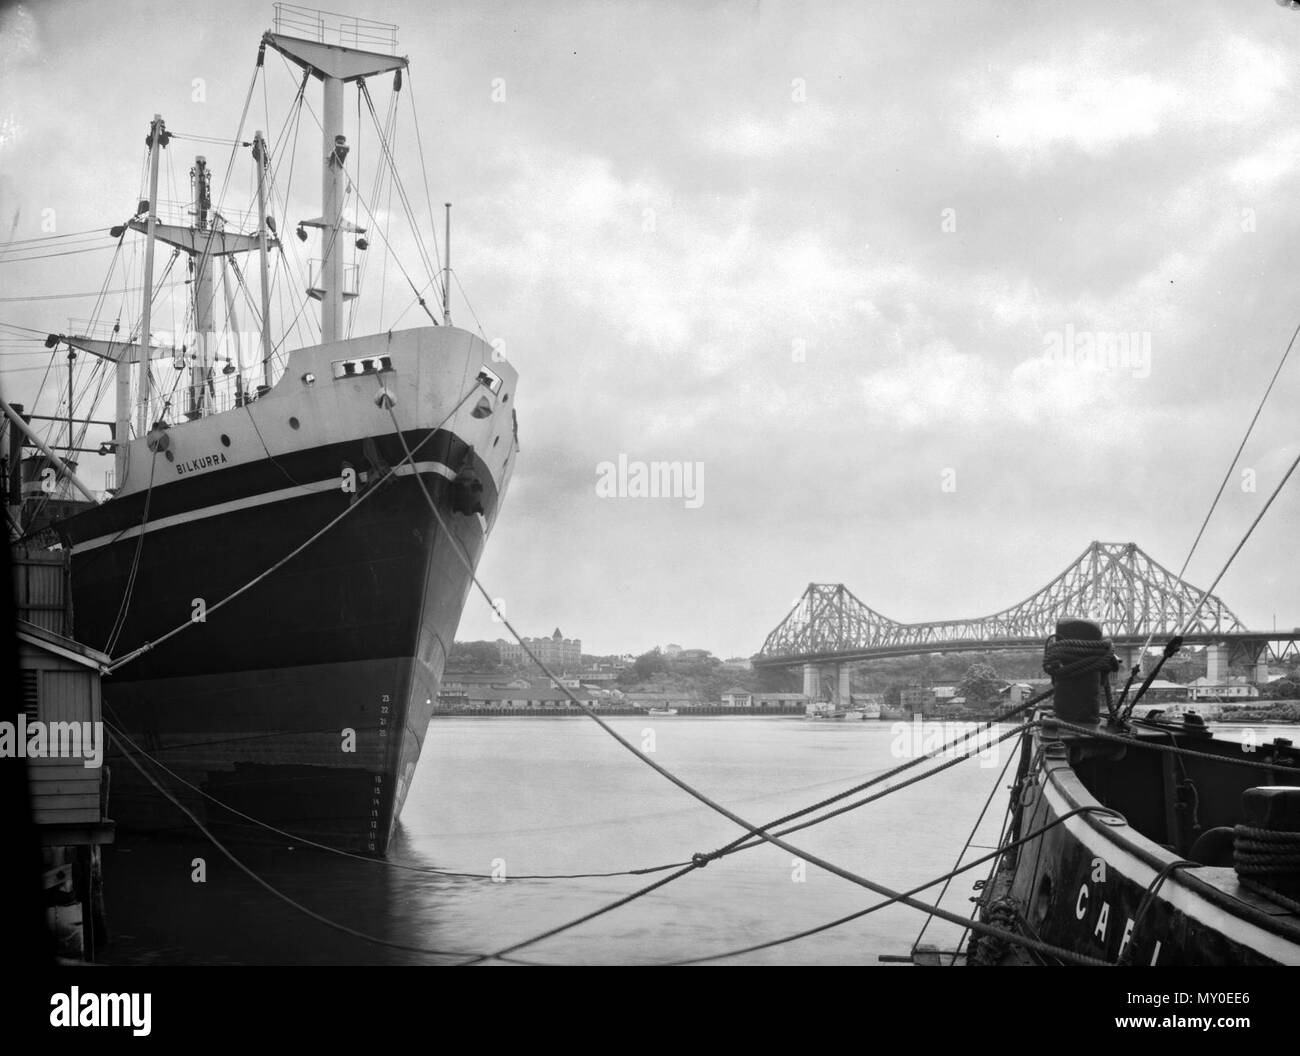 SS Bilkurra, Brisbane, 1949. SS Bilkurra was a 3,952 t cargo ship built by Evans Deakin &amp; Co. Ltd, Kangaroo Point, Brisbane in 1949 for the Australian Shipping Board. She was transferred to the Australian National Line in 1959 and sold to Malaysian International Shipping Corp as Malaysia Maju. She was sold again in 1971 to Pac Trade Navigation Co., Panama and renamed Santa Carina, being retired and broken up in 1974. Stock Photo